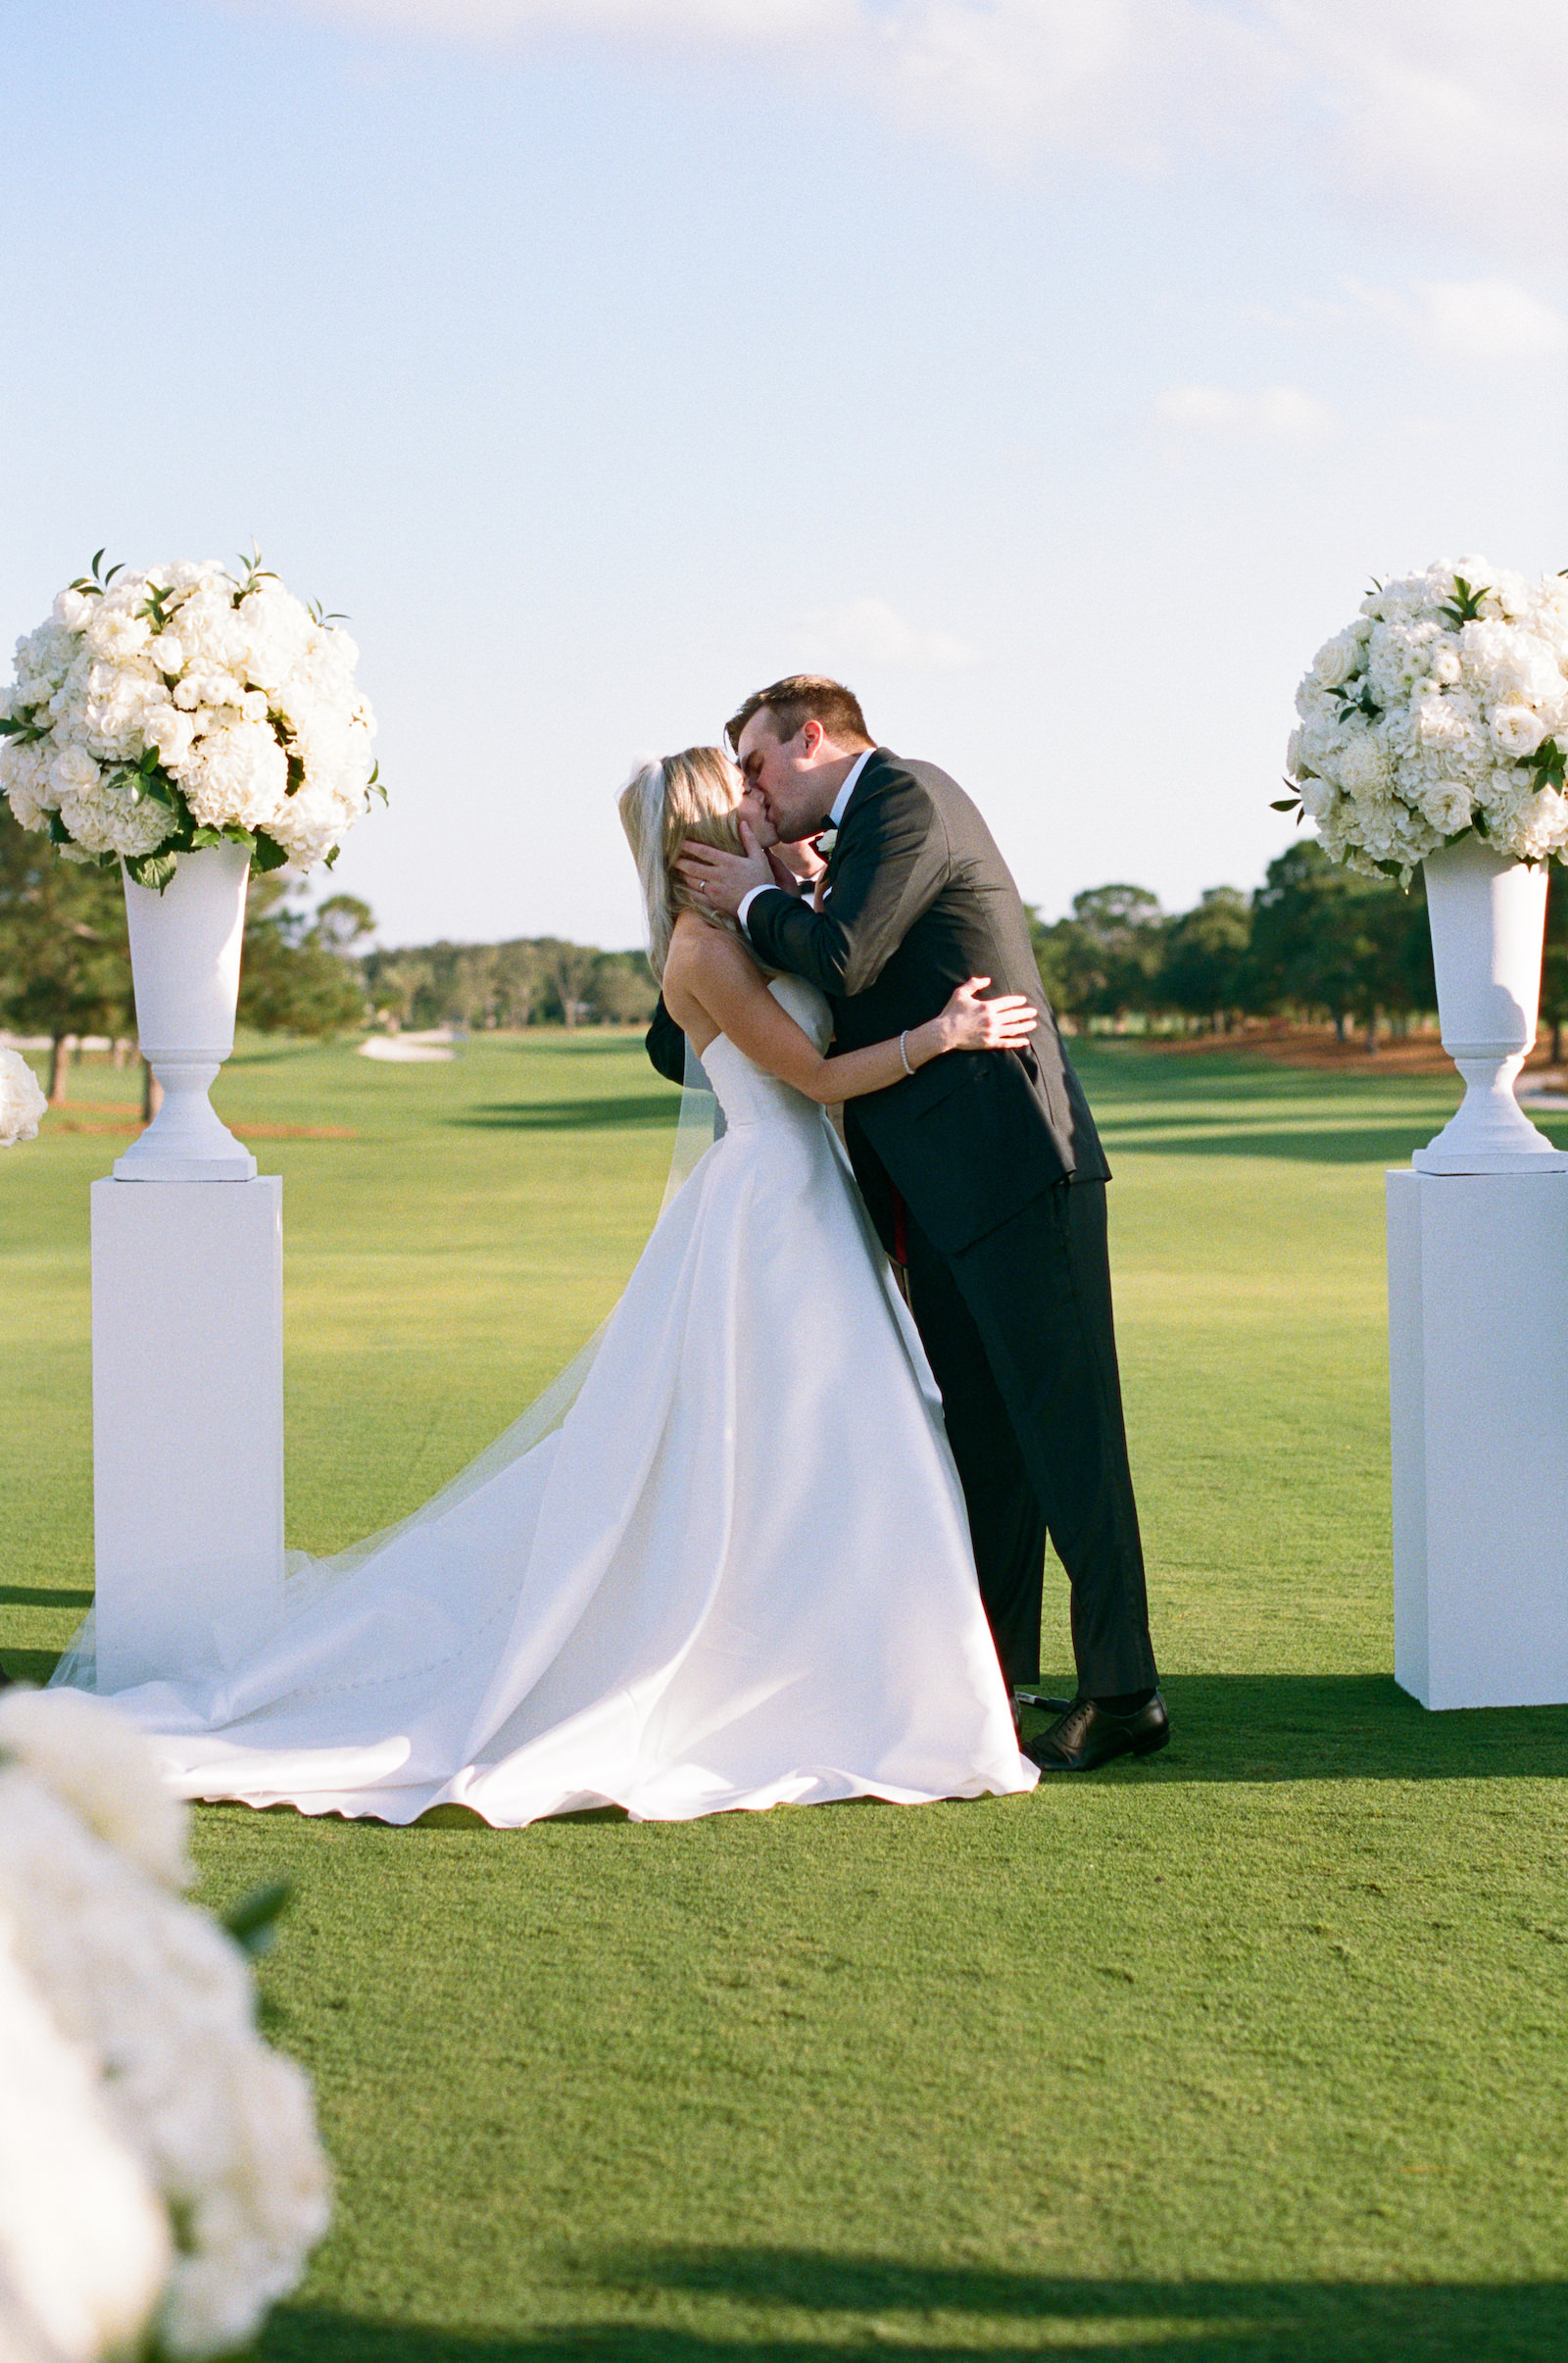 Bride and Groom Exchanging First Kiss, Luxurious Formal All White Outdoor Wedding Ceremony | Tampa Bay Wedding Florist Bruce Wayne Florals